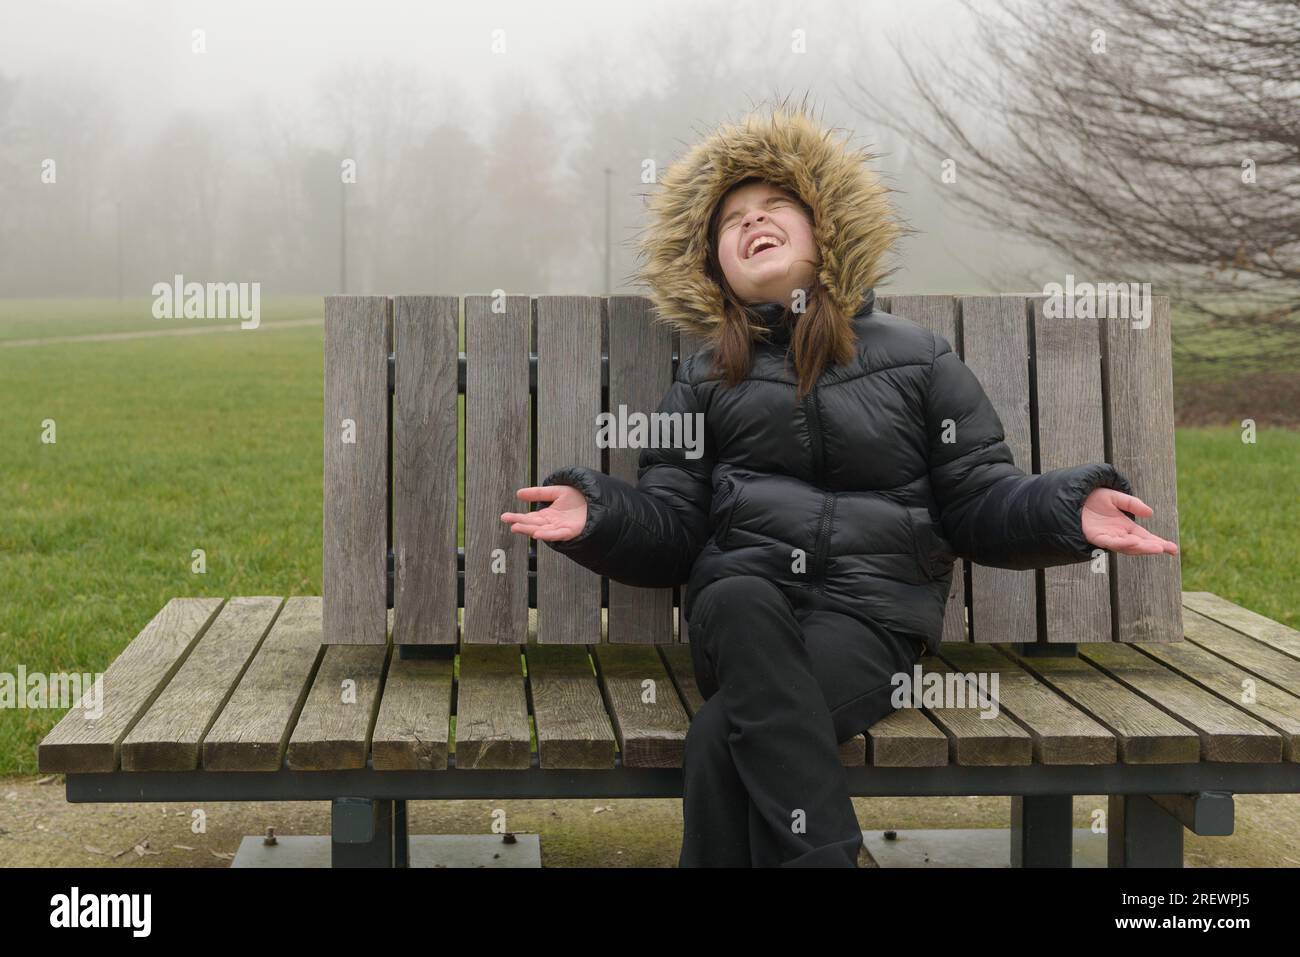 Girl in a good mood on a park bench in winter. Warm jacket, fog Stock Photo